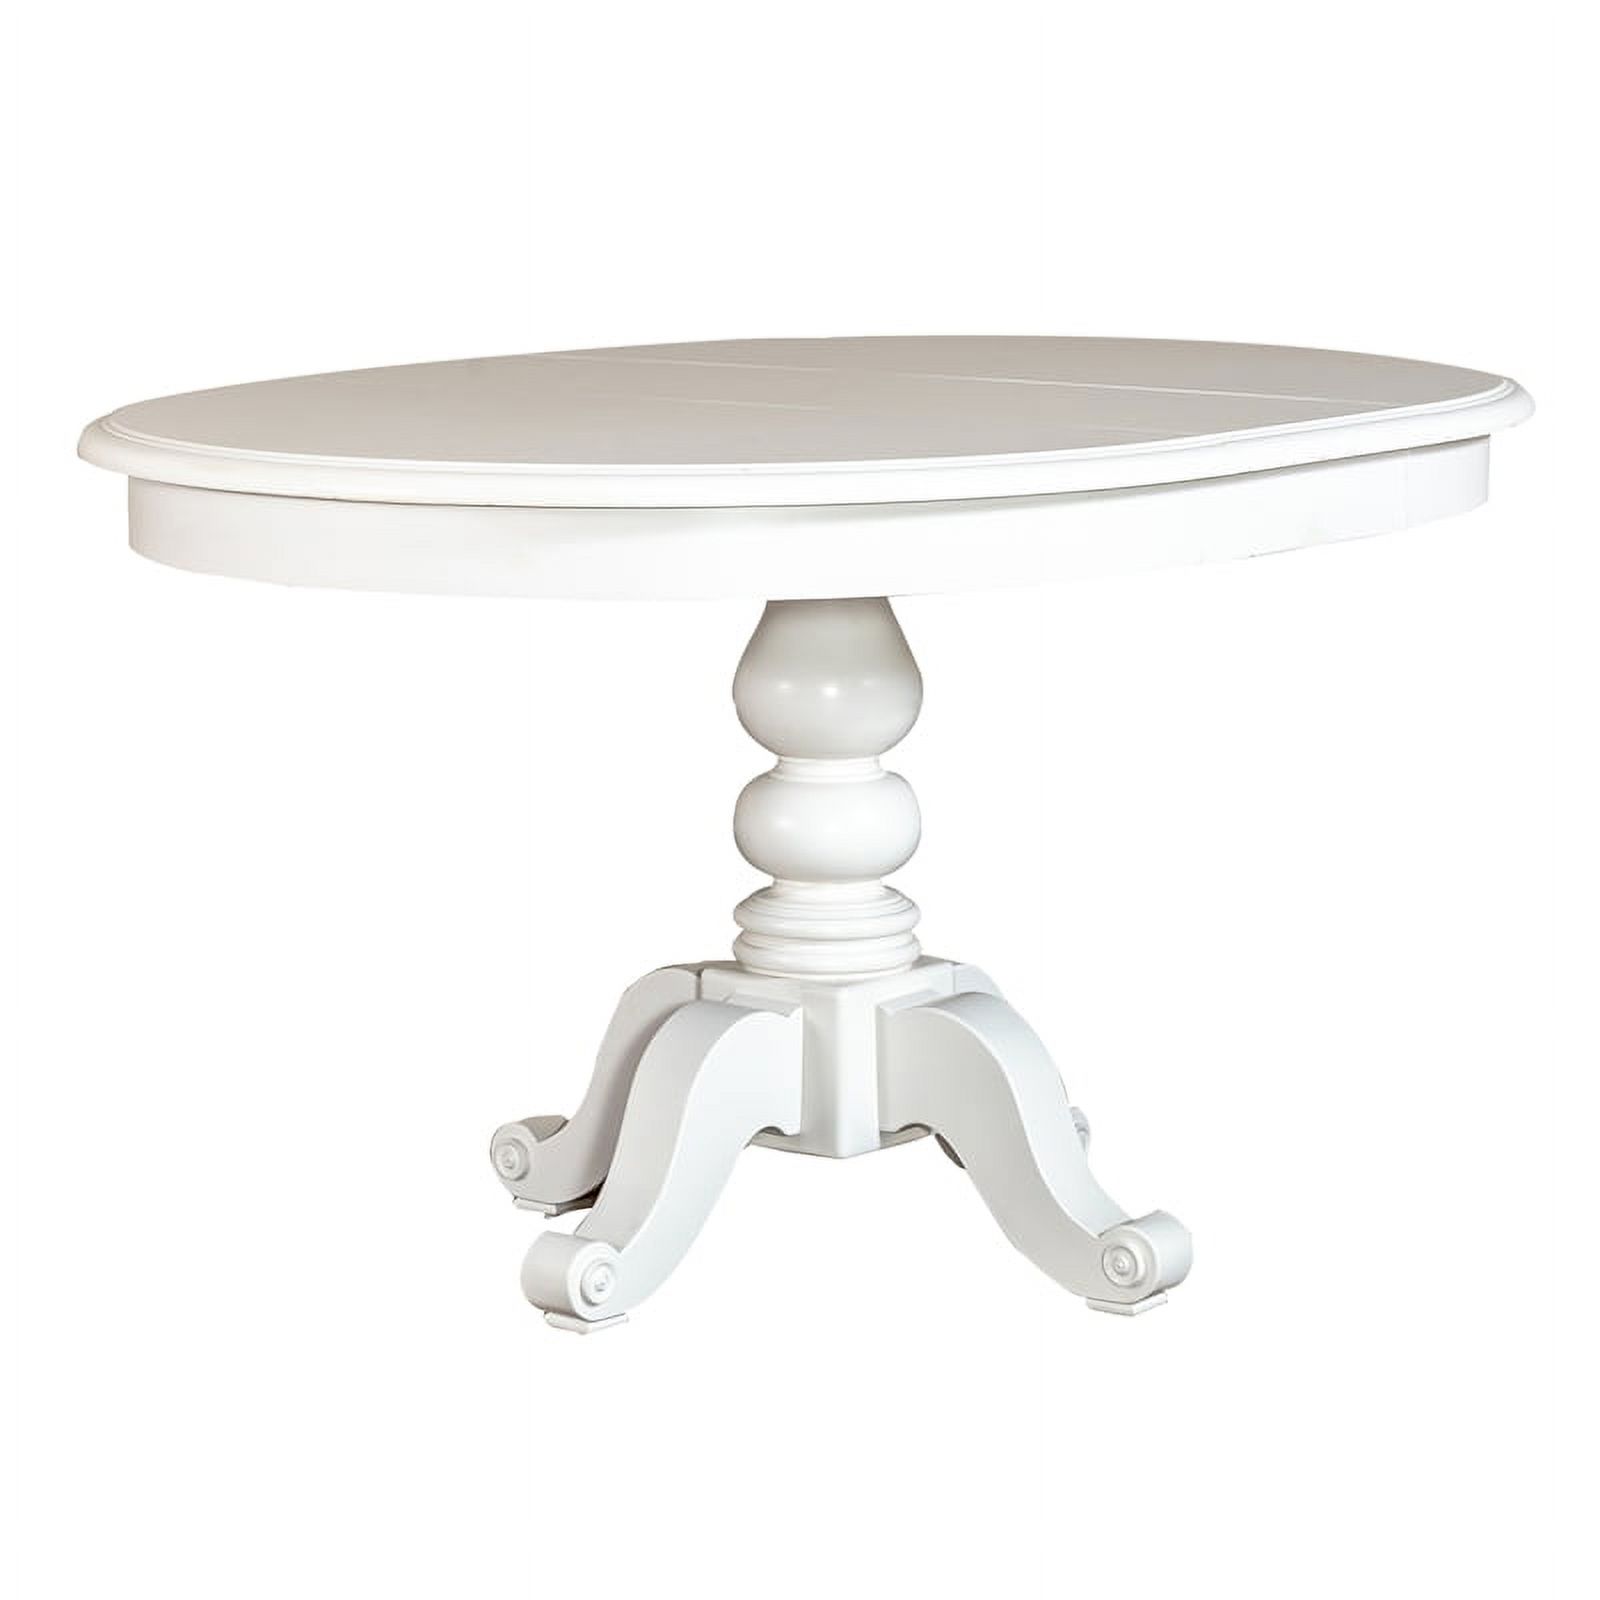 Summer House White 5 Piece Pedestal Table Set - image 3 of 14